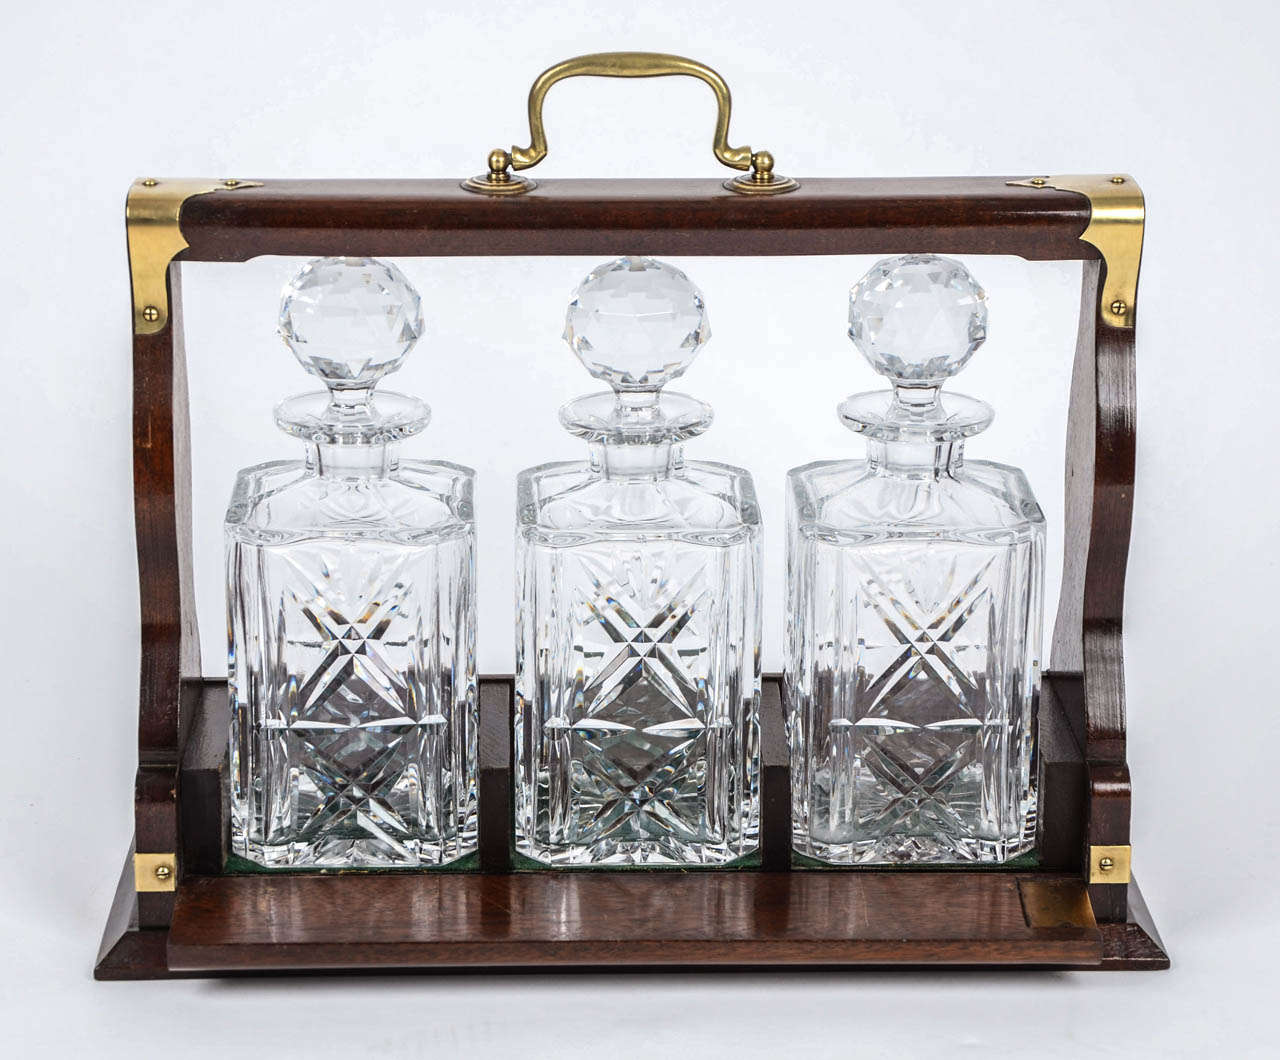 This TANTALUS holds three matching heavily cut, Crystal (Cut Glass), square based, straight sided spirit decanters, all with original faceted ball stoppers.

The decanters sit in a quality mahogany framed box with brass corner mounts and a solid